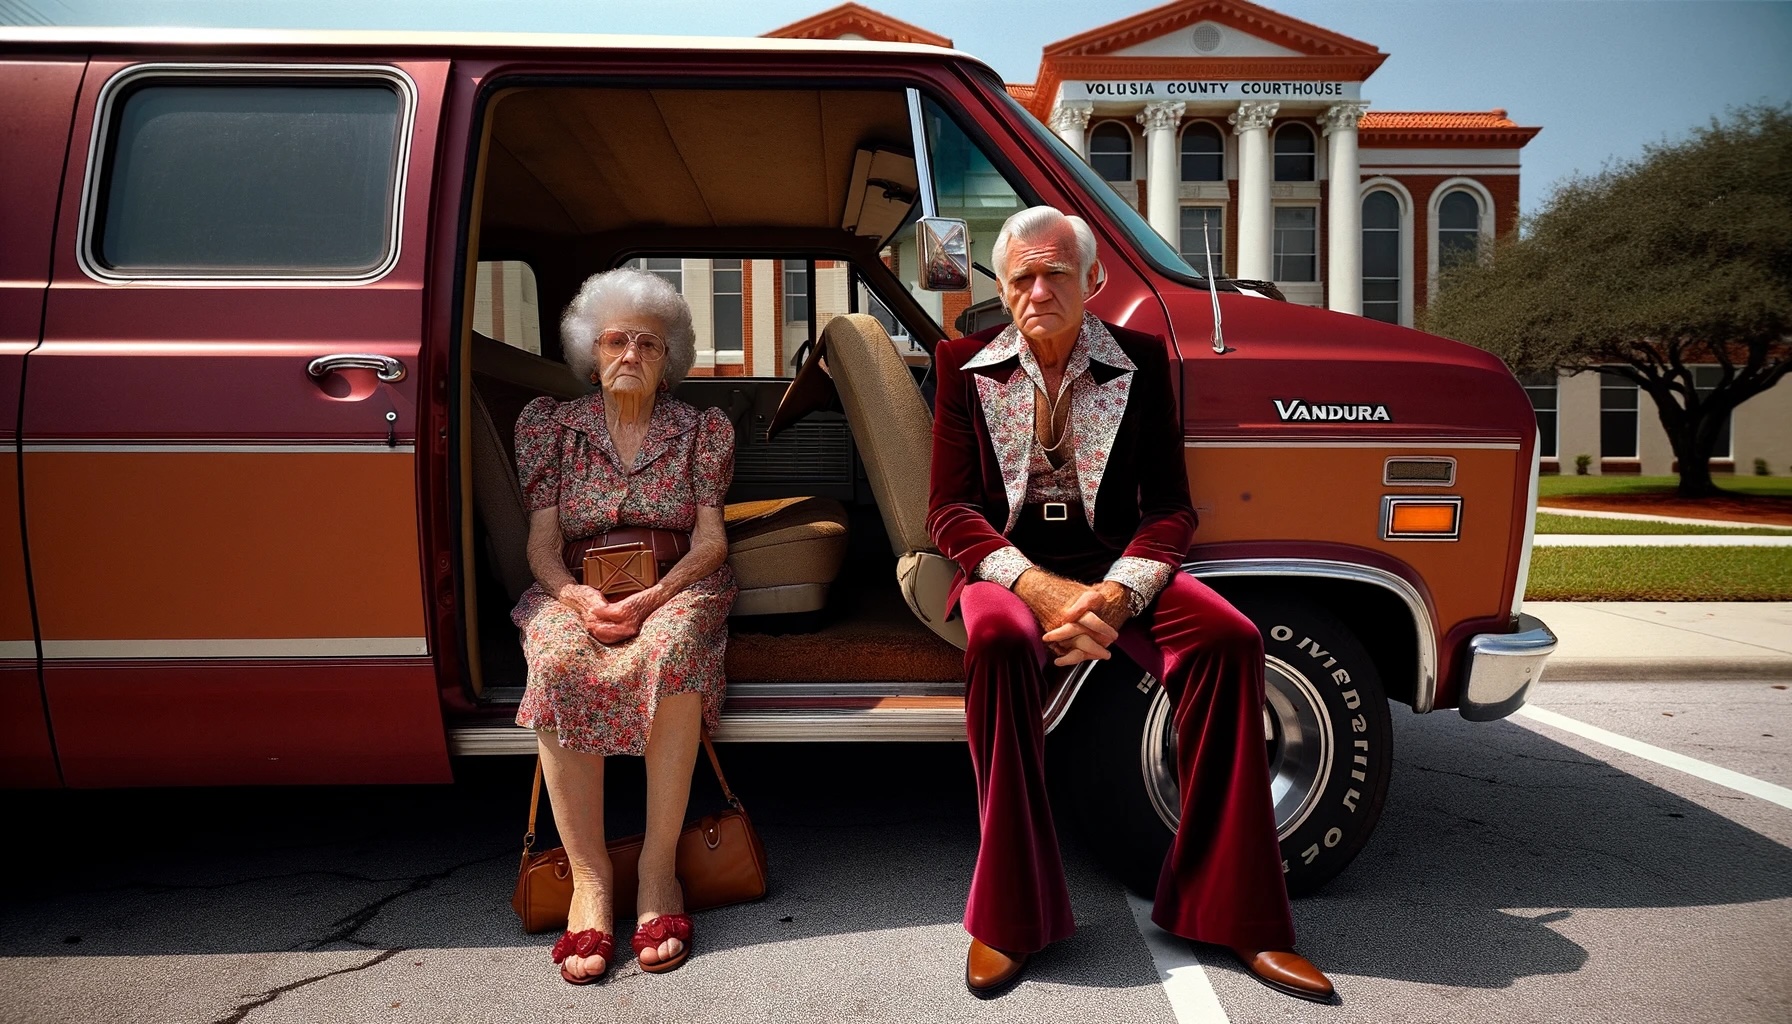 An elderly couple sits solemnly in an open burgundy van parked in front of the Volusia County Courthouse.